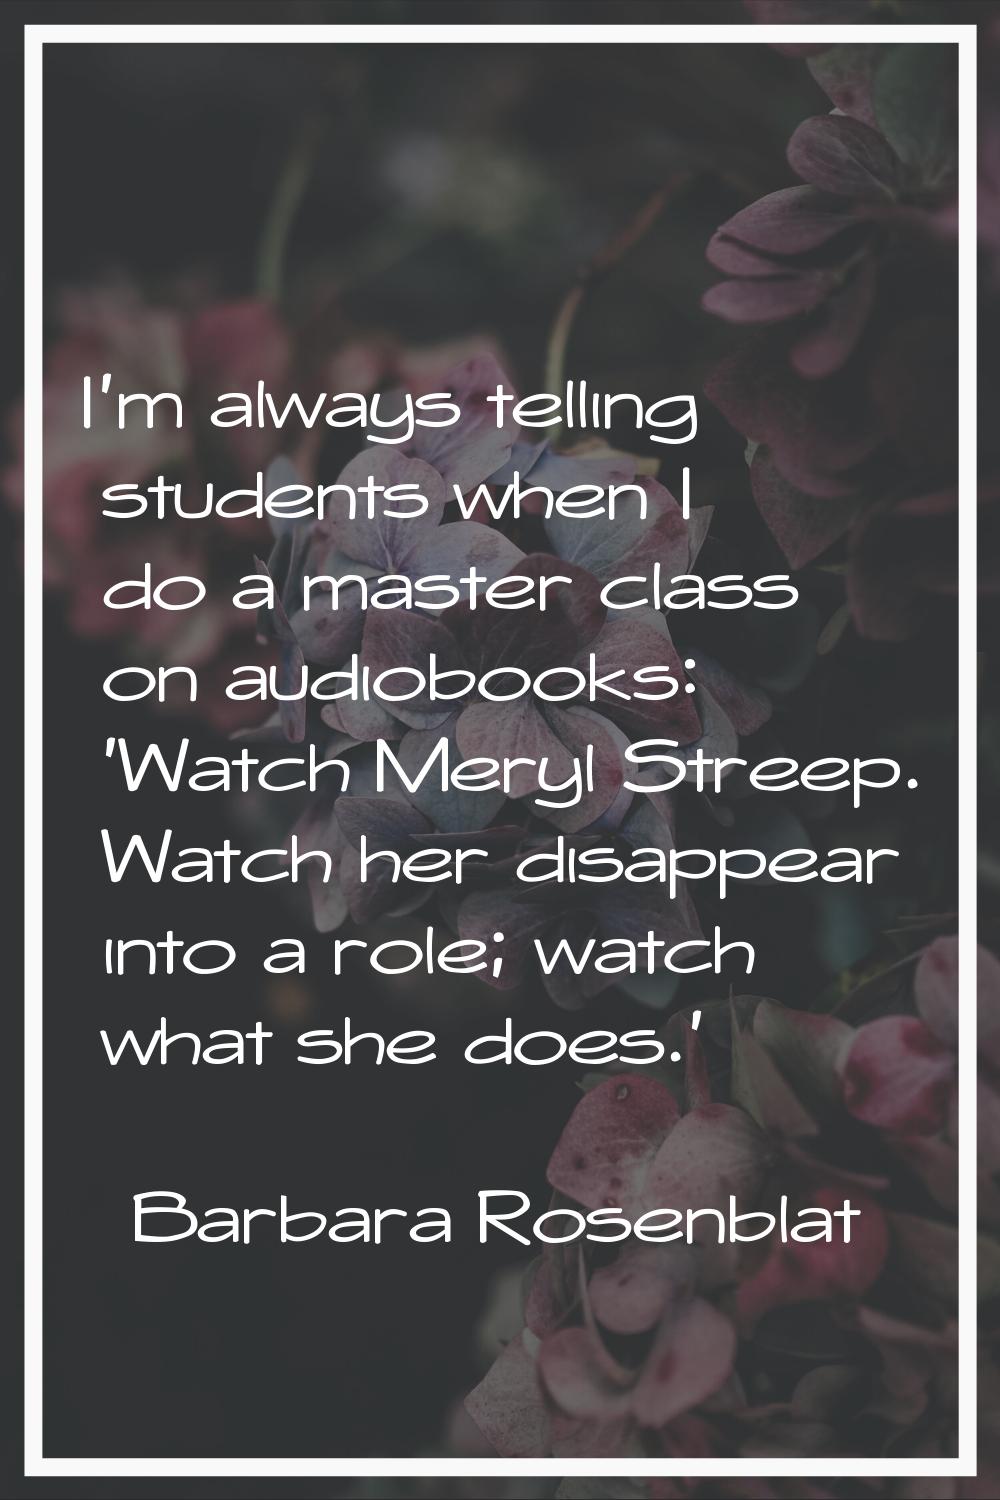 I'm always telling students when I do a master class on audiobooks: 'Watch Meryl Streep. Watch her 